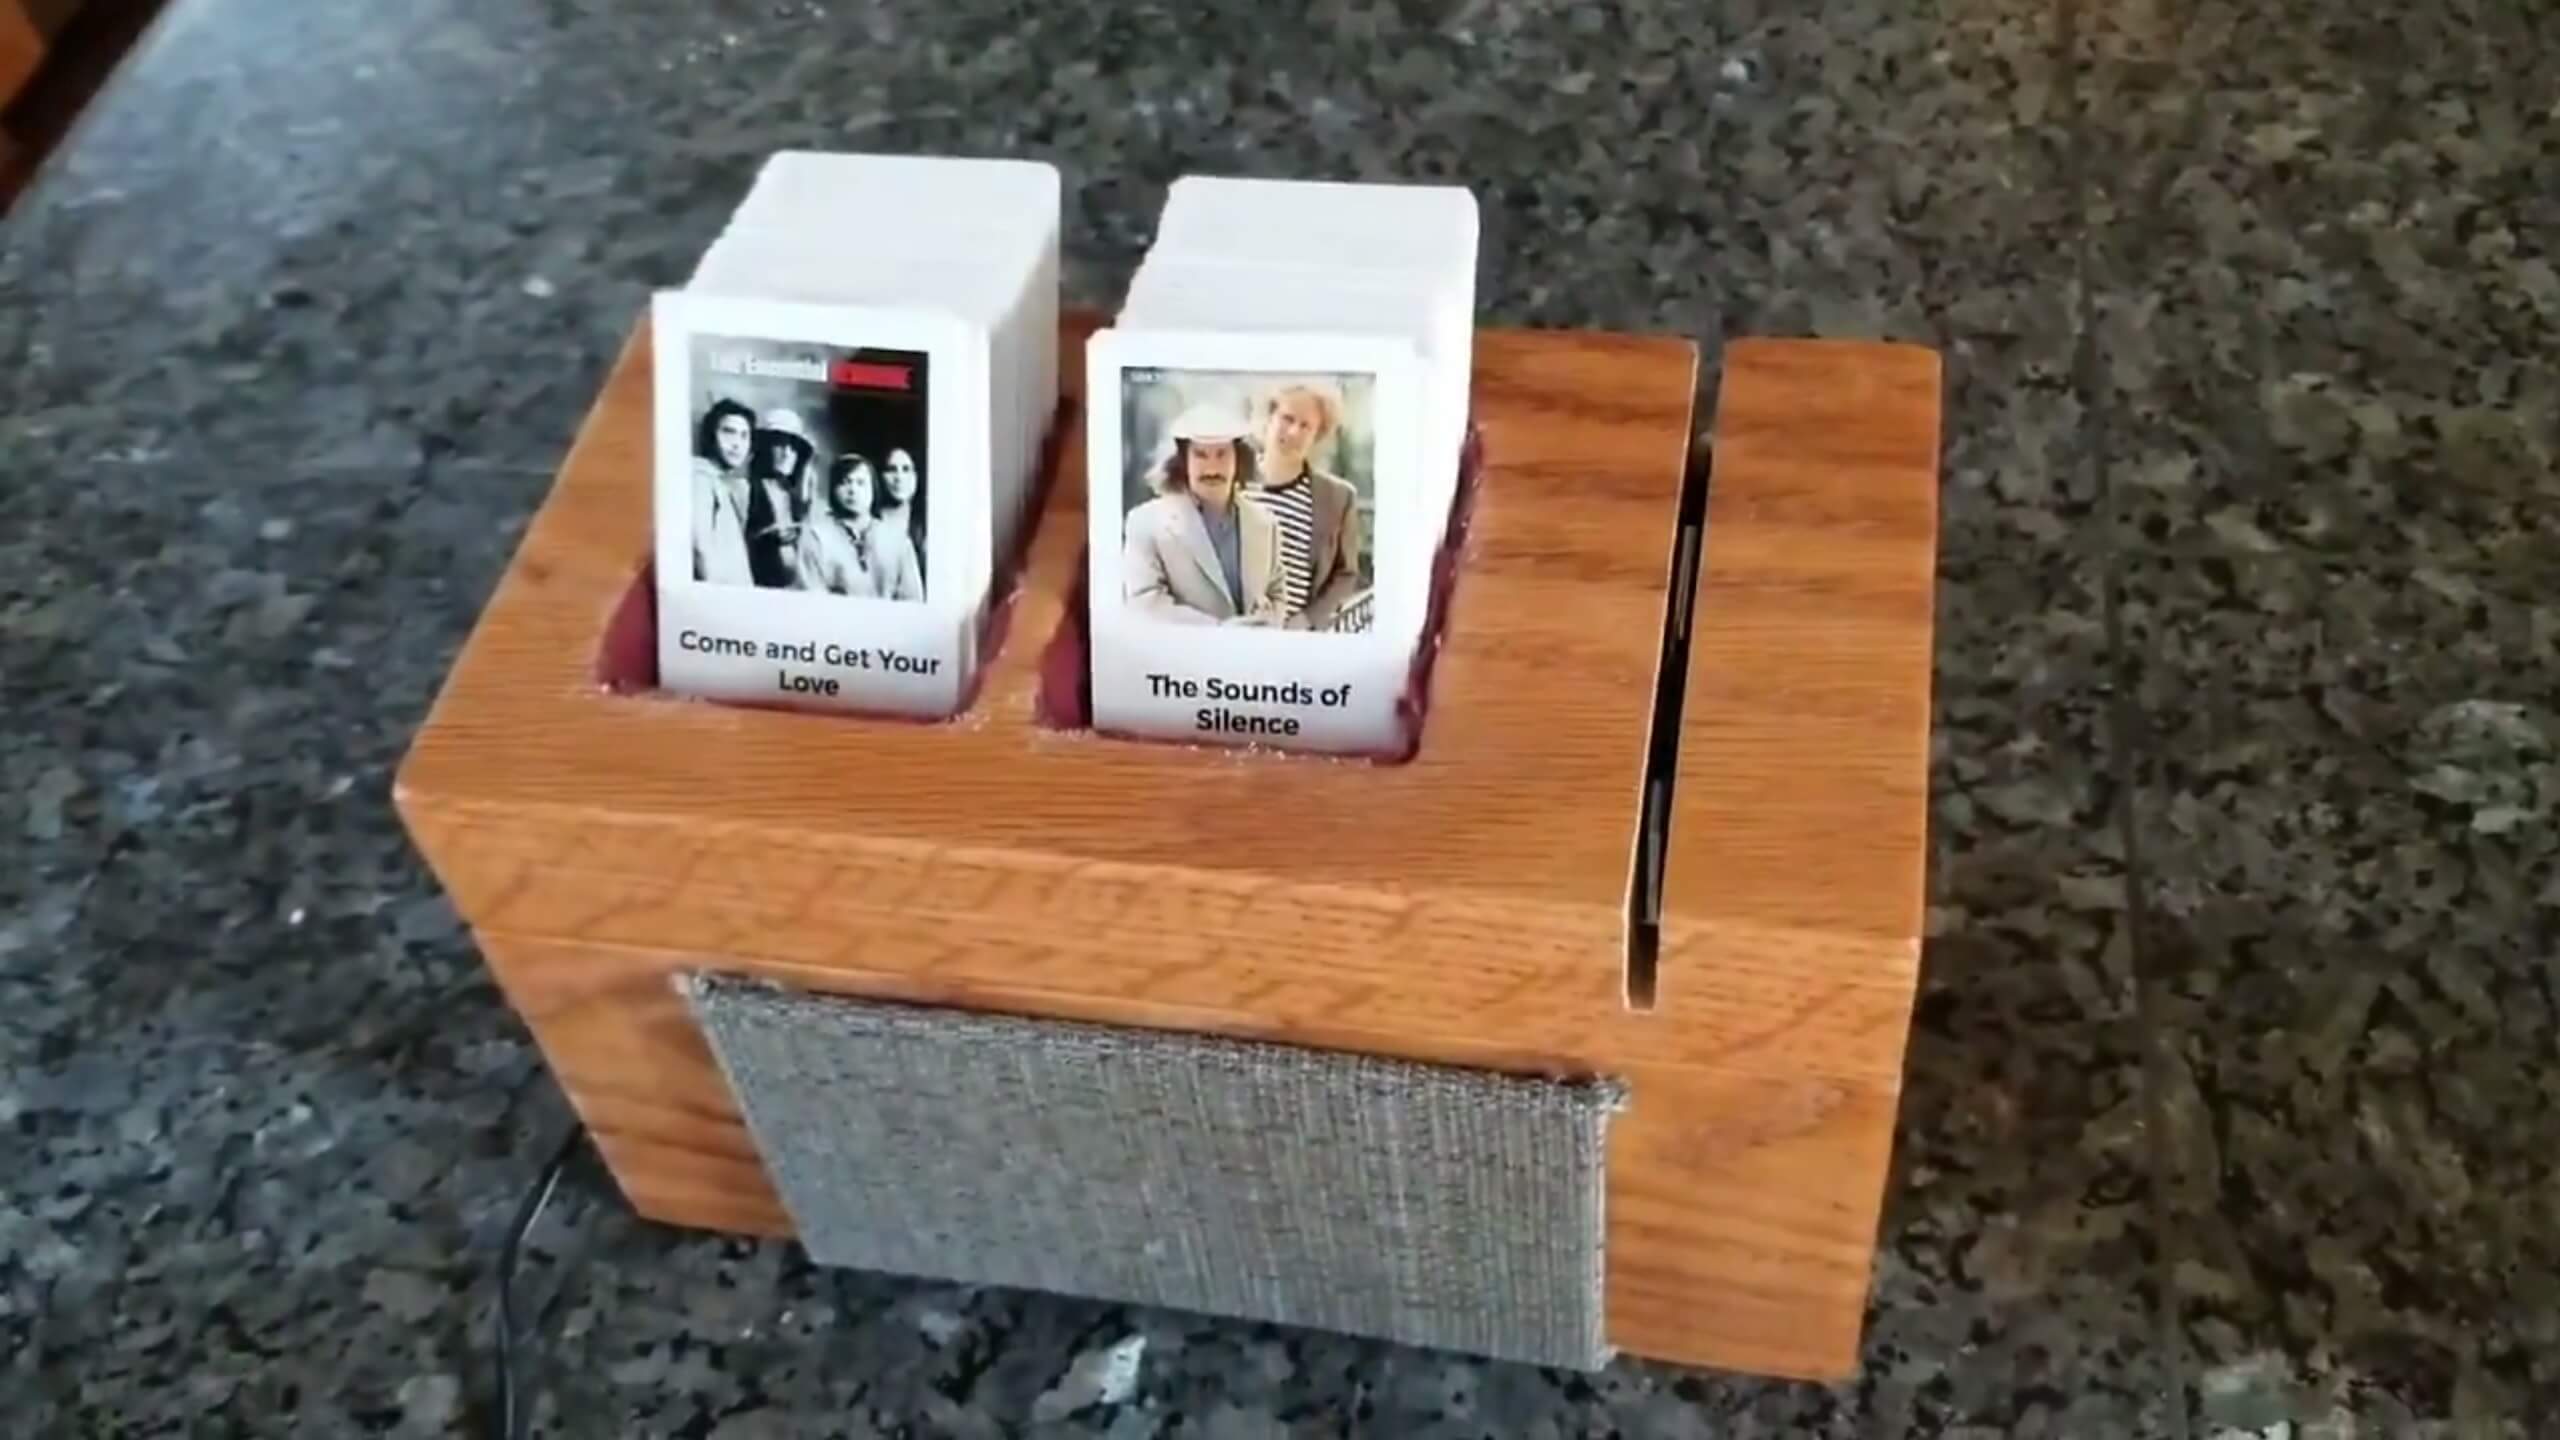 Check out this homemade jukebox that uses swipe cards to play songs